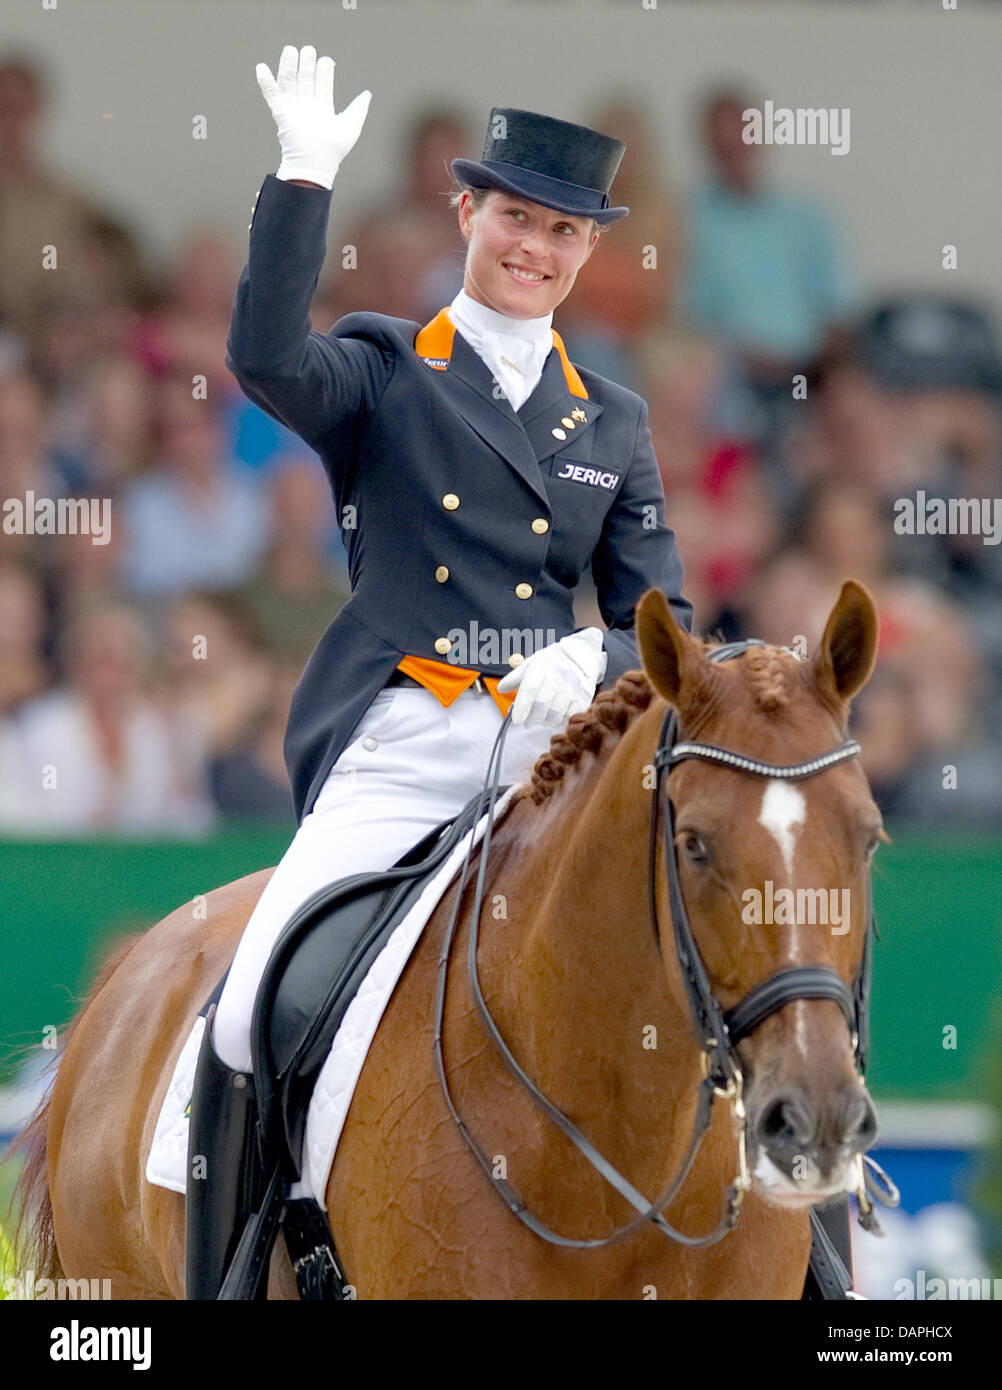 Dutch equestrian Adelinde Cornelissen smiles and waves as she praises her horse Jerich Parzival during the Grand Prix Special at the European Dressage Championship in Rotterdam, Netherlands, 20 August 2011. Cornelissen took first place. Photo: Uwe Anspach Stock Photo